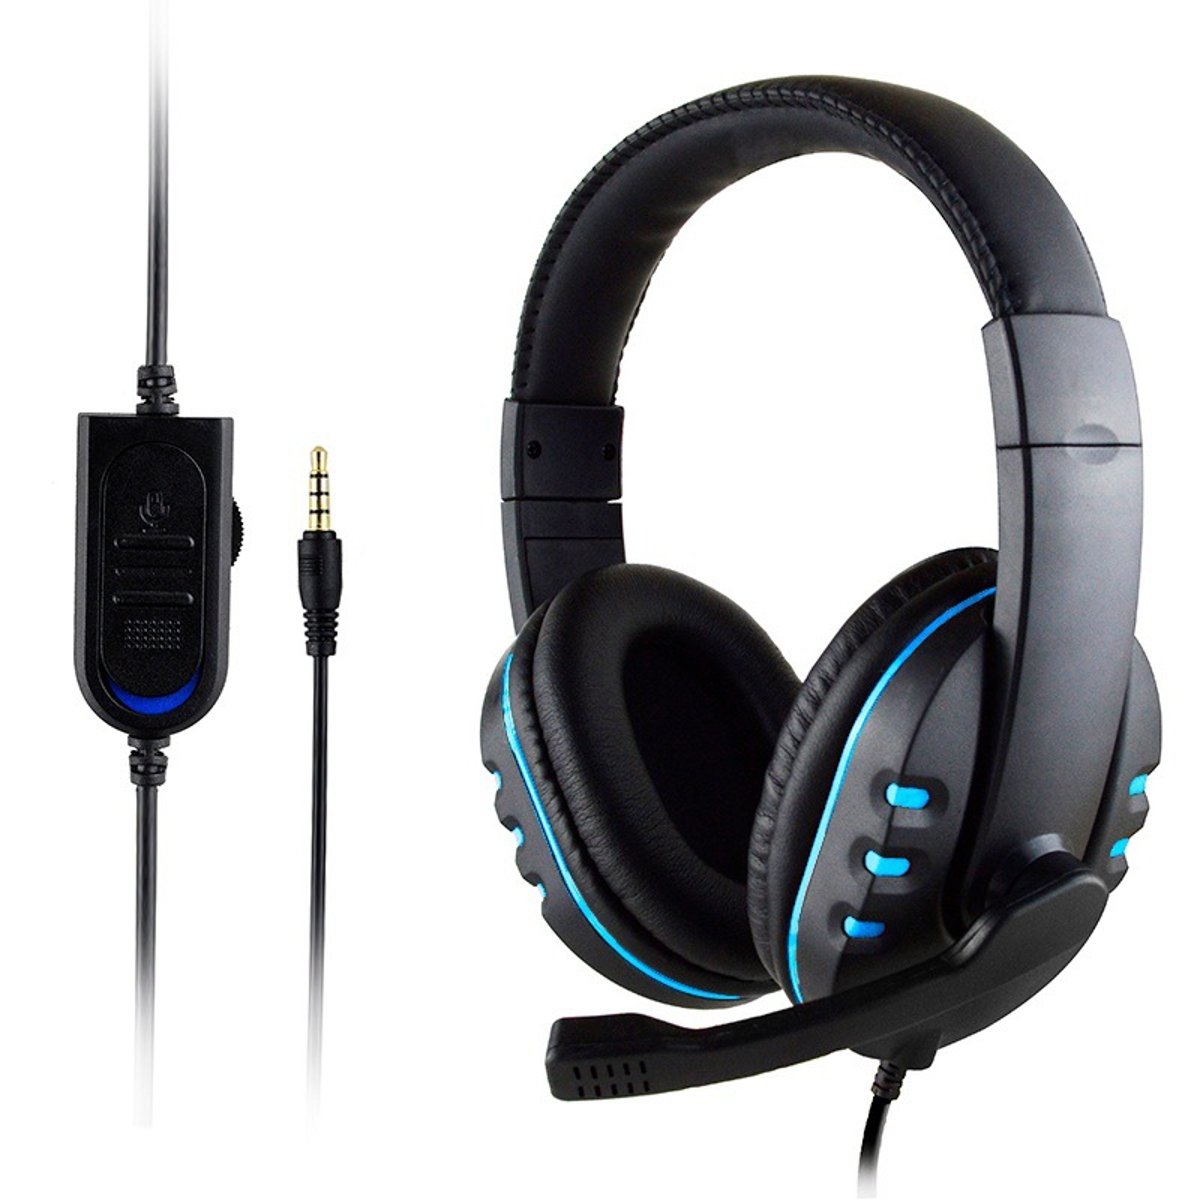 Portable-Gaming-Headset-35mm-Stereo-Surround-Gamer-Wired-Headphone-With-Mic-for-PC-Computer-PS4-Xbox-1699413-2